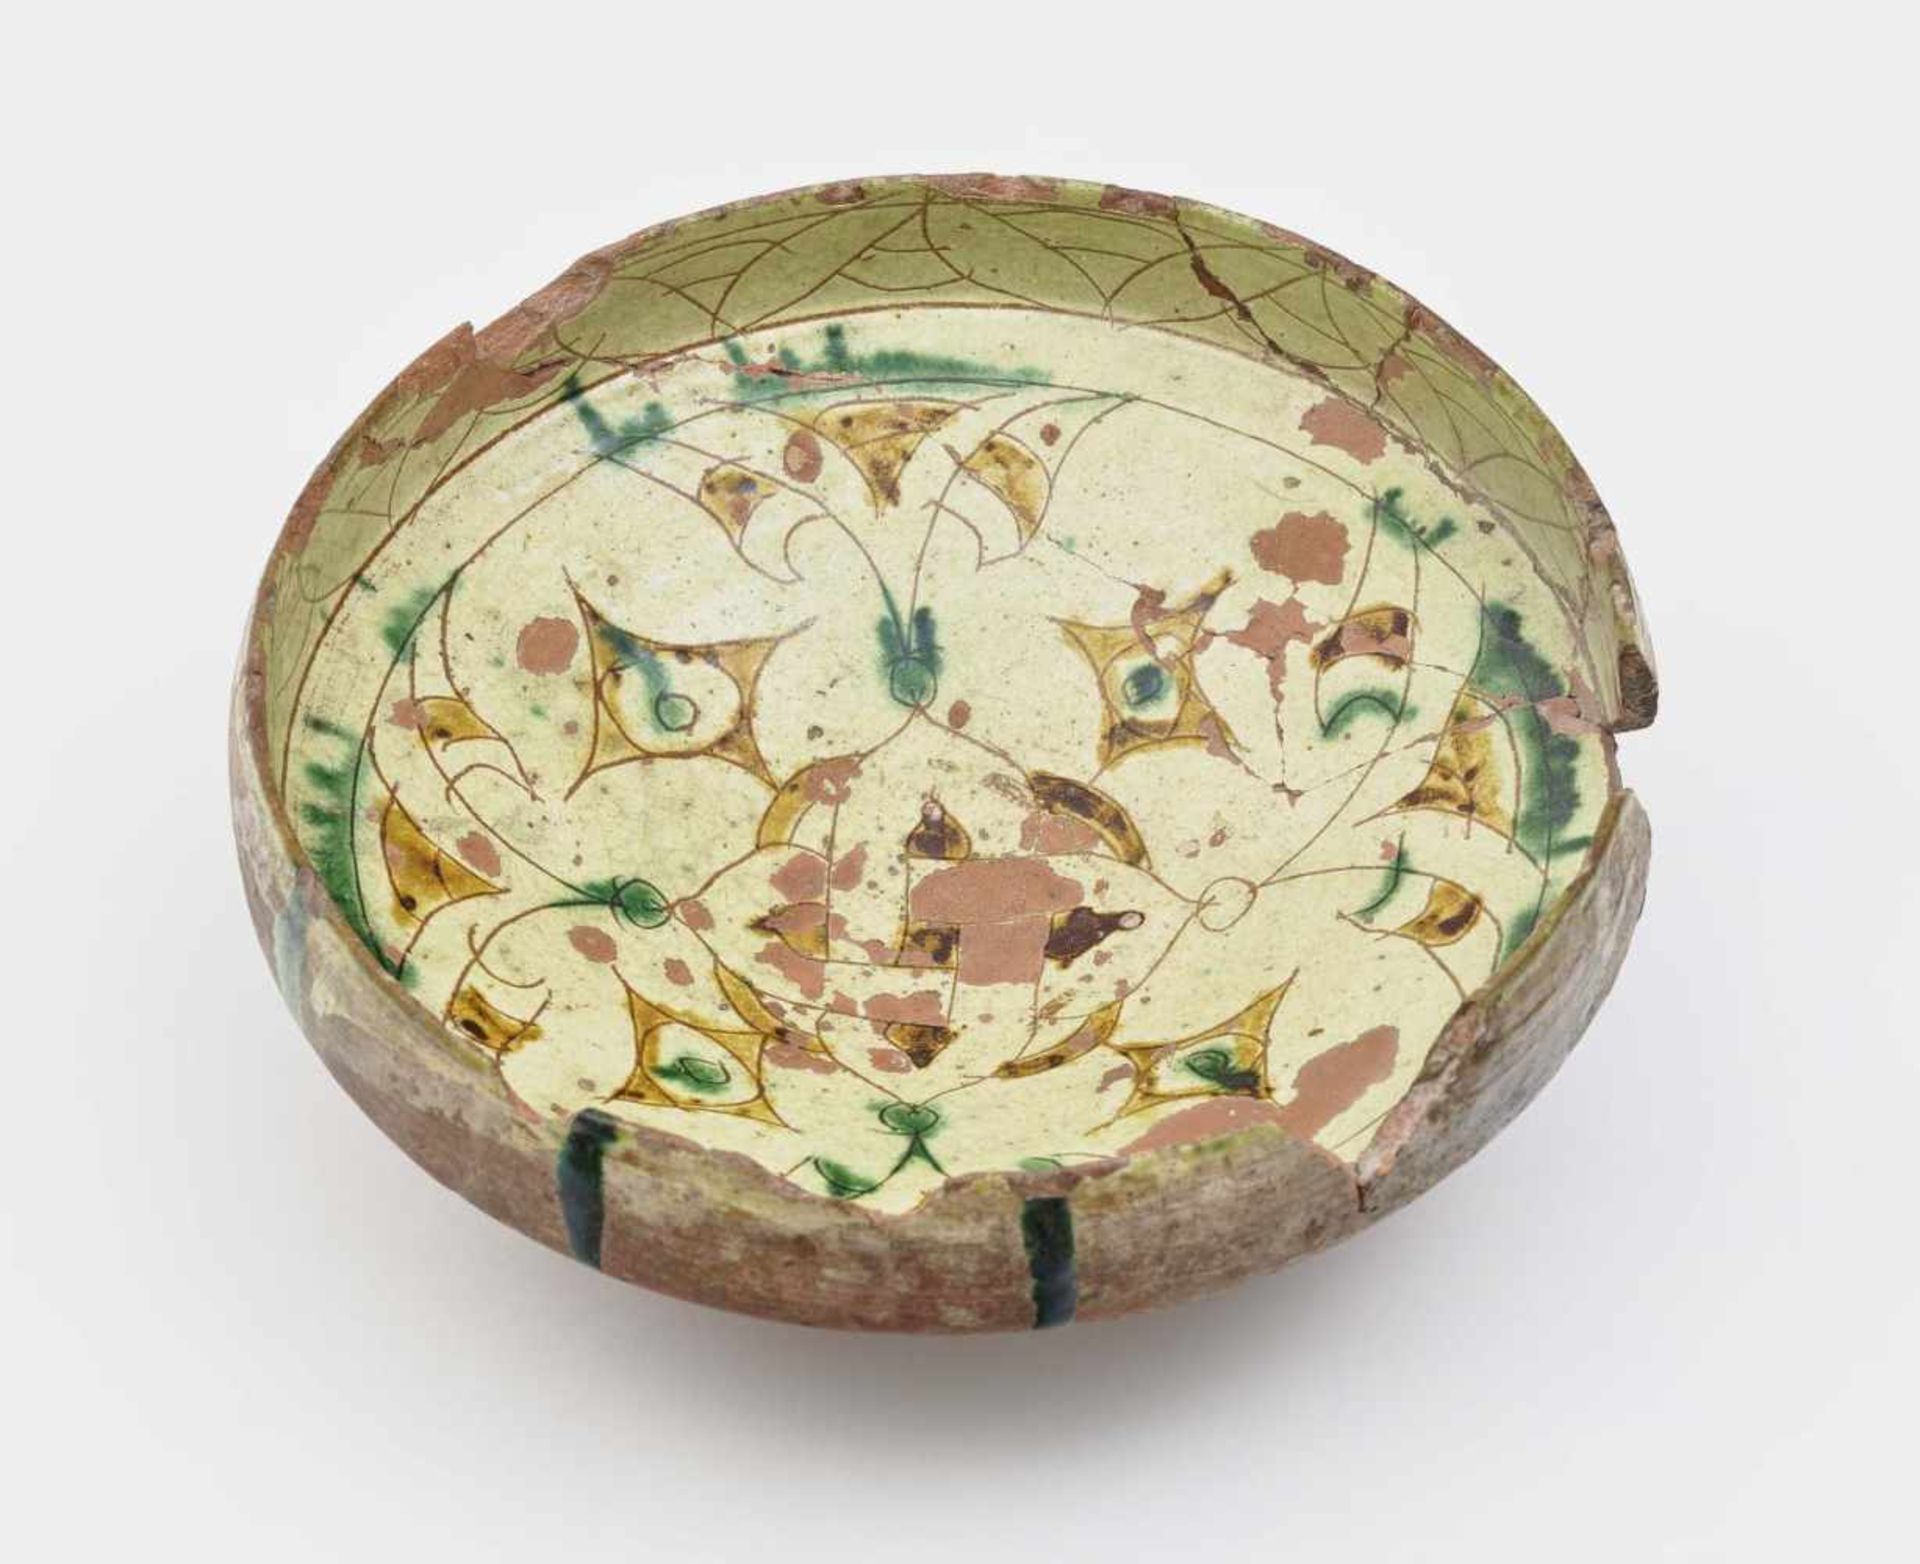 A bowlSoutheast Anatolia, 12th/13th century Earthenware. Carved decor, base coated with white